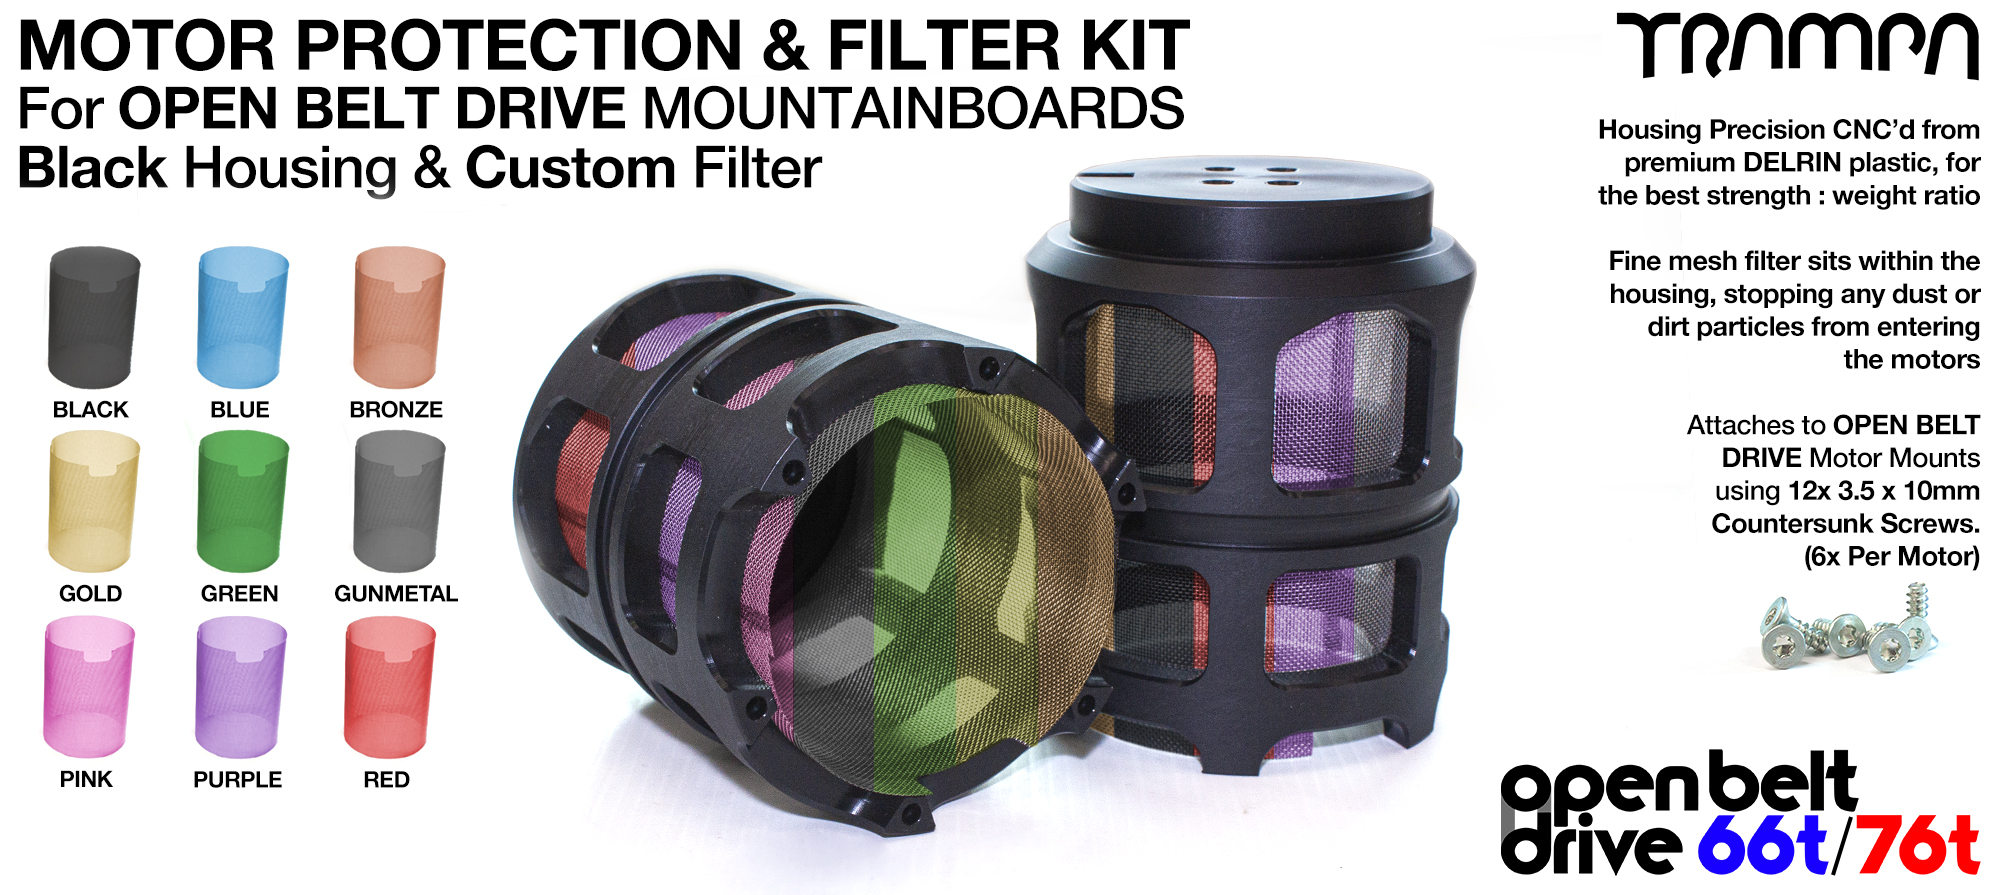 FULL CAGE Motor protection & Filters with FAN's (+£60)